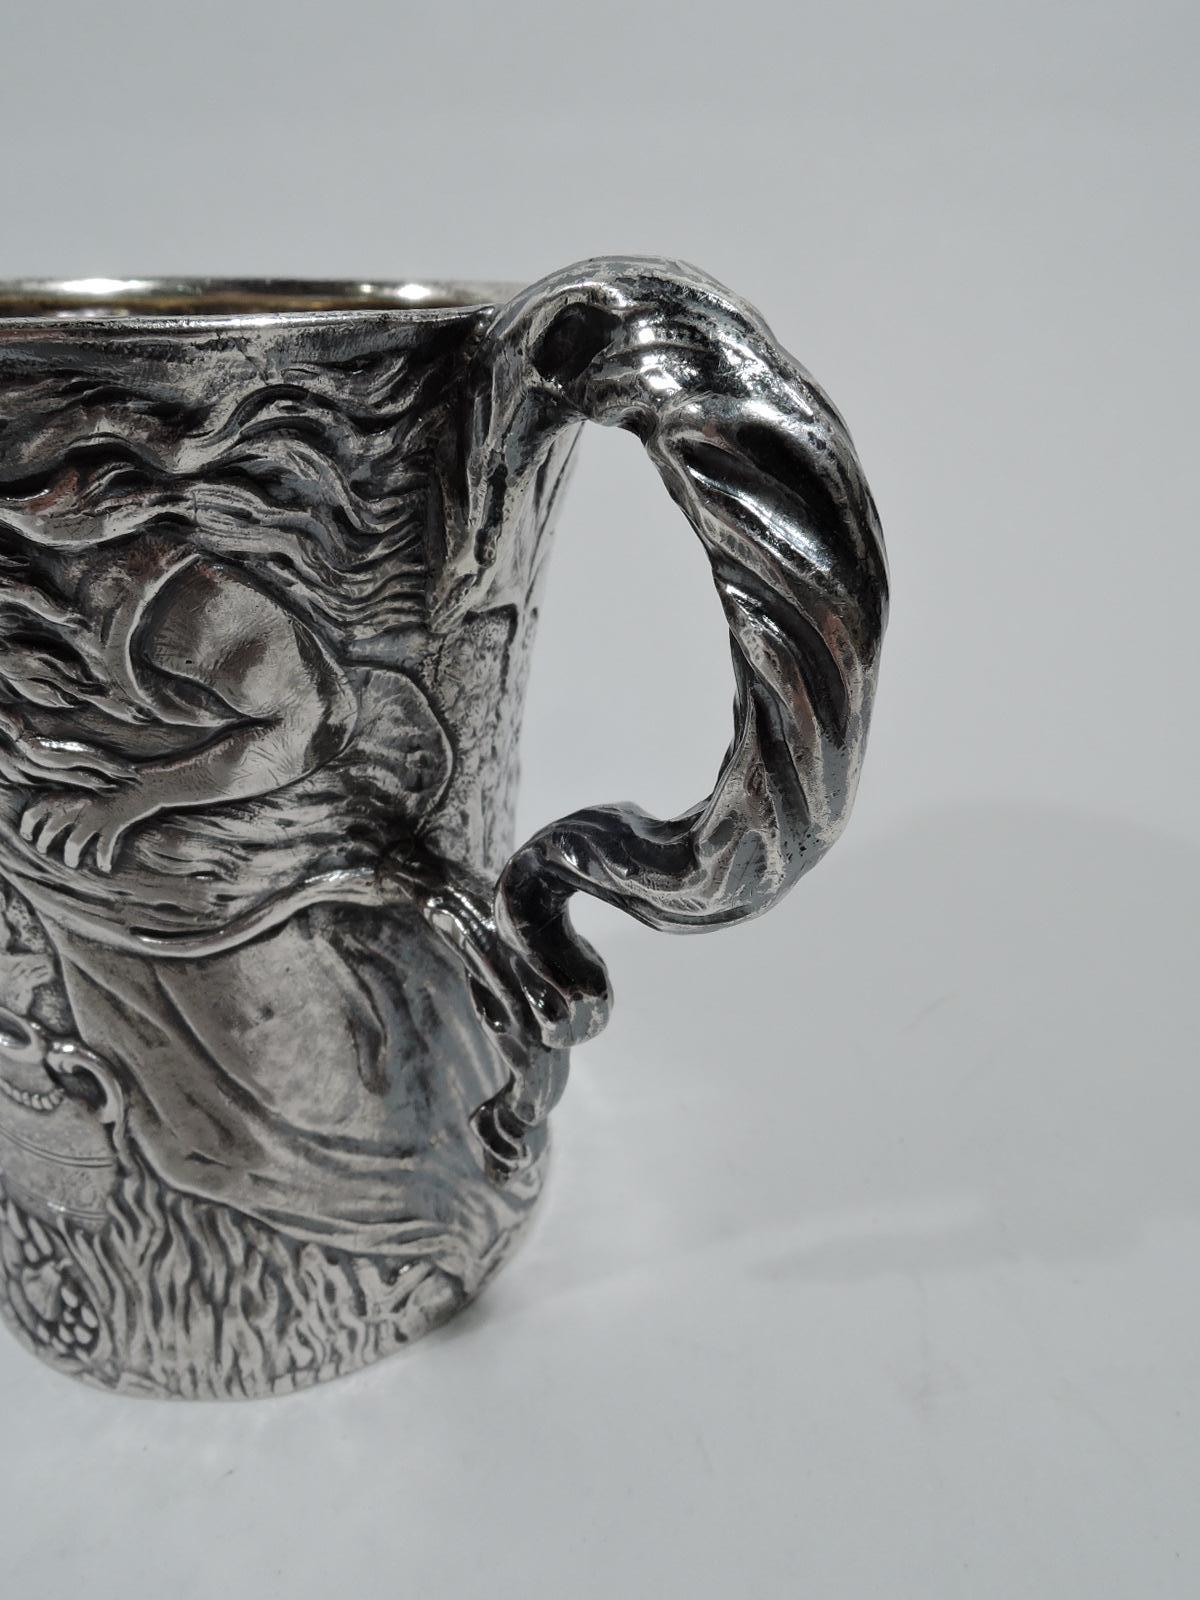 19th Century Rare & Unusual Antique American Sterling Silver Baby Cup by Tiffany